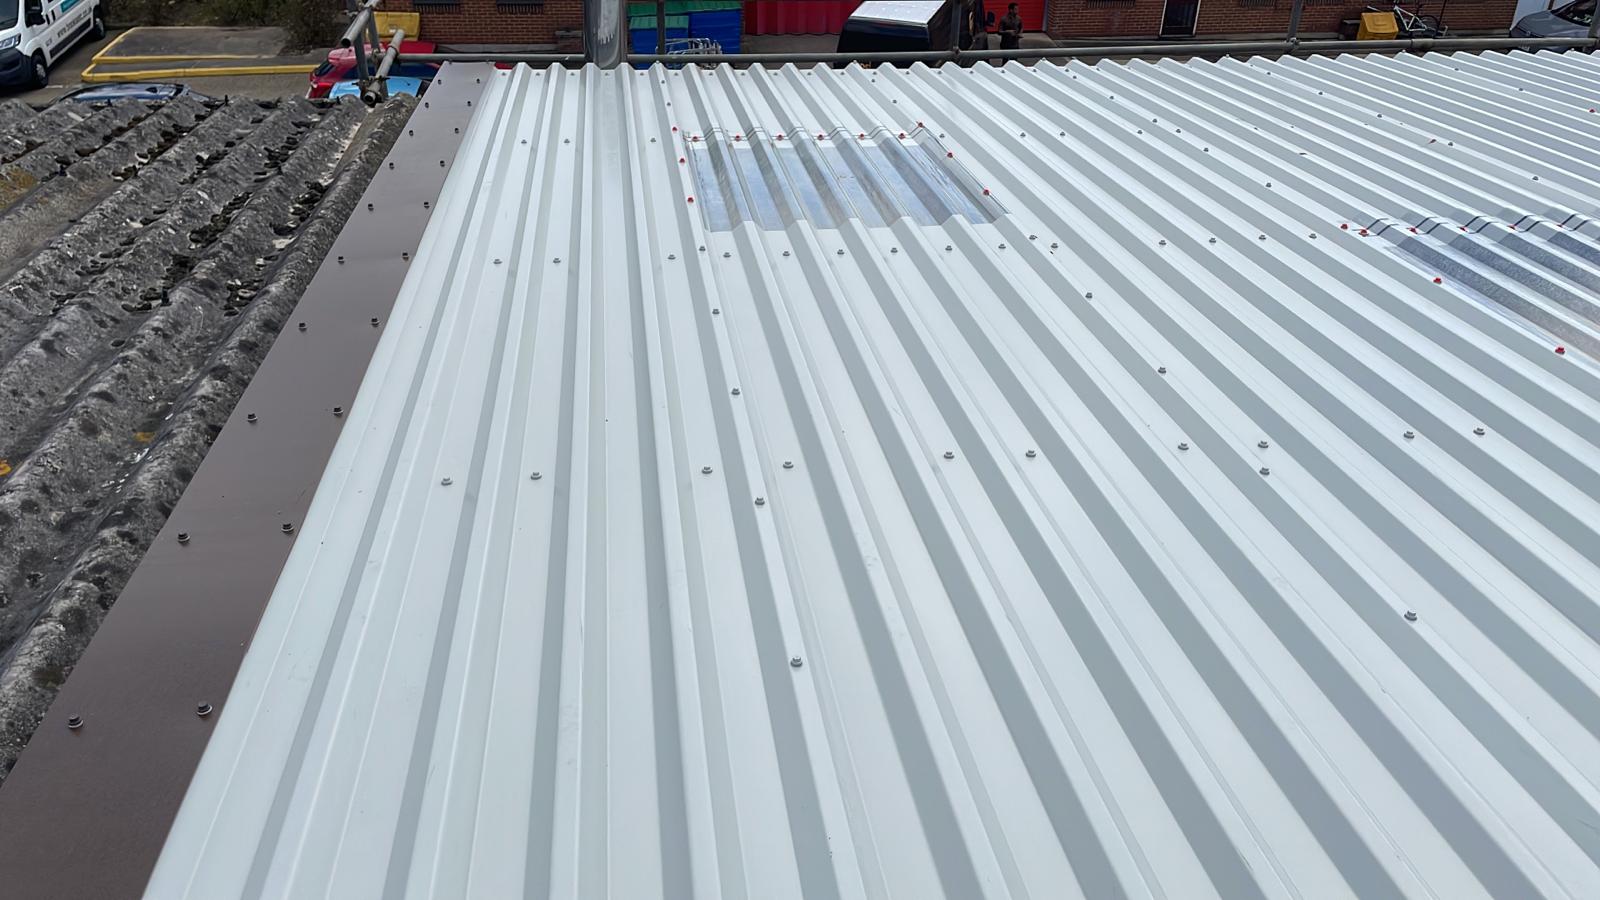 Over-roofing to a warehouse roof in Aldershot, Hampshire